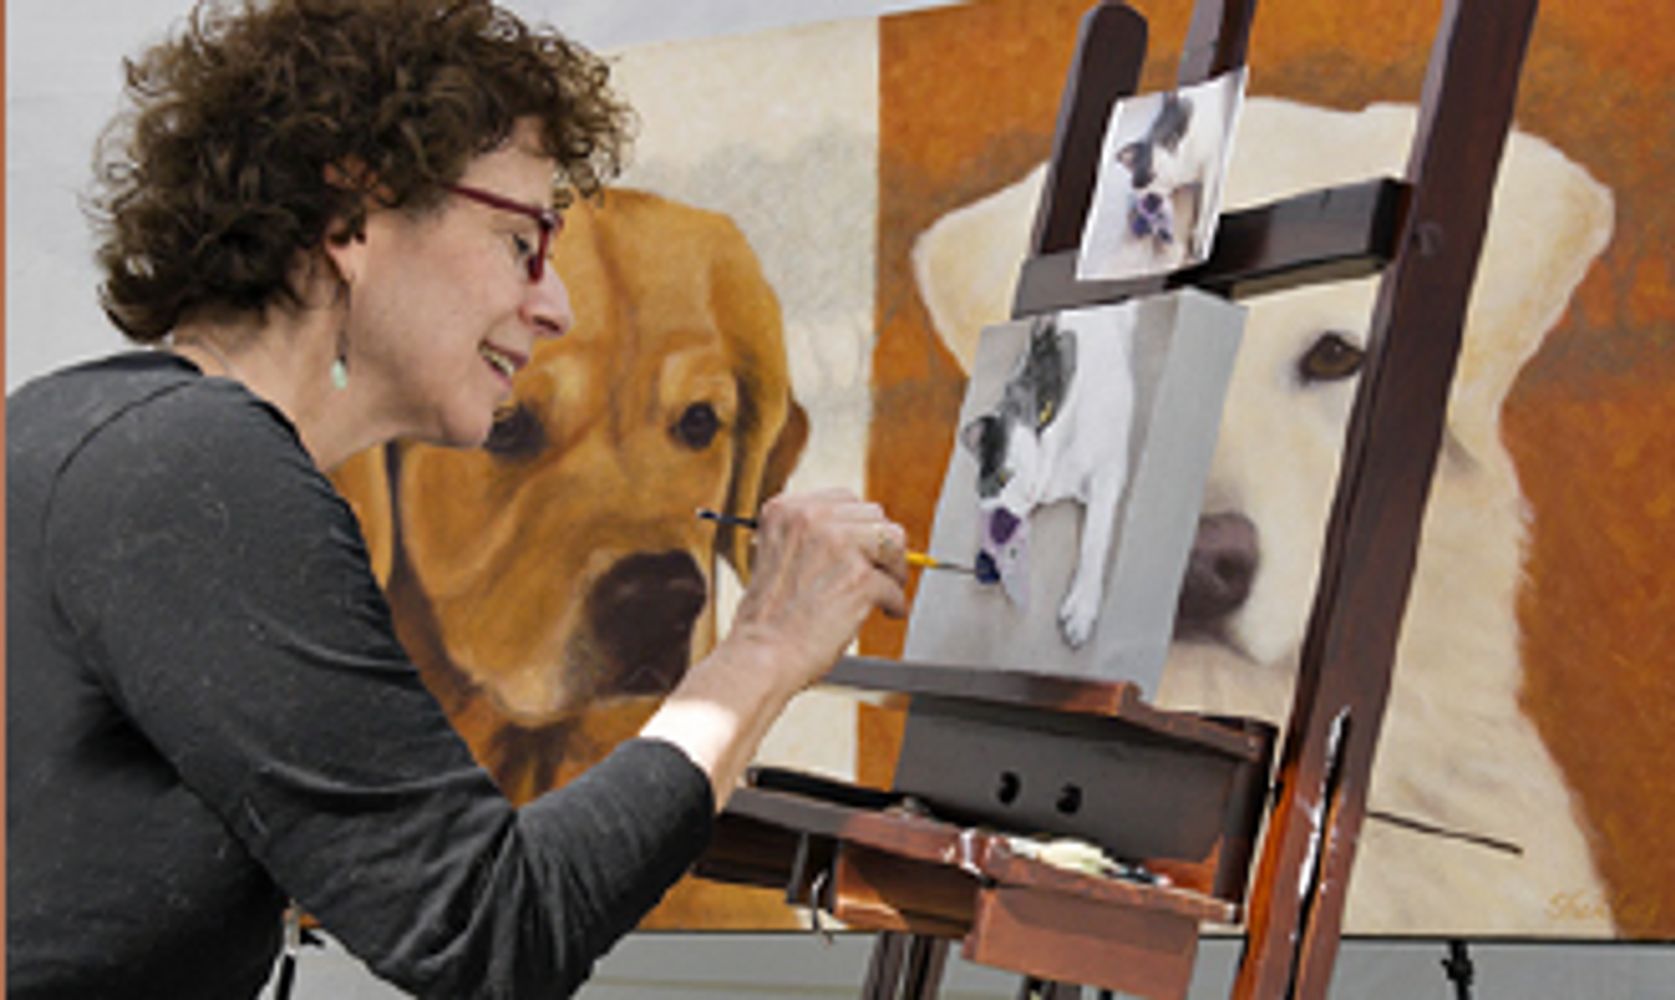 Shelley Lowell painting a portrait 
of a cat with her painting of dogs 
in the background.